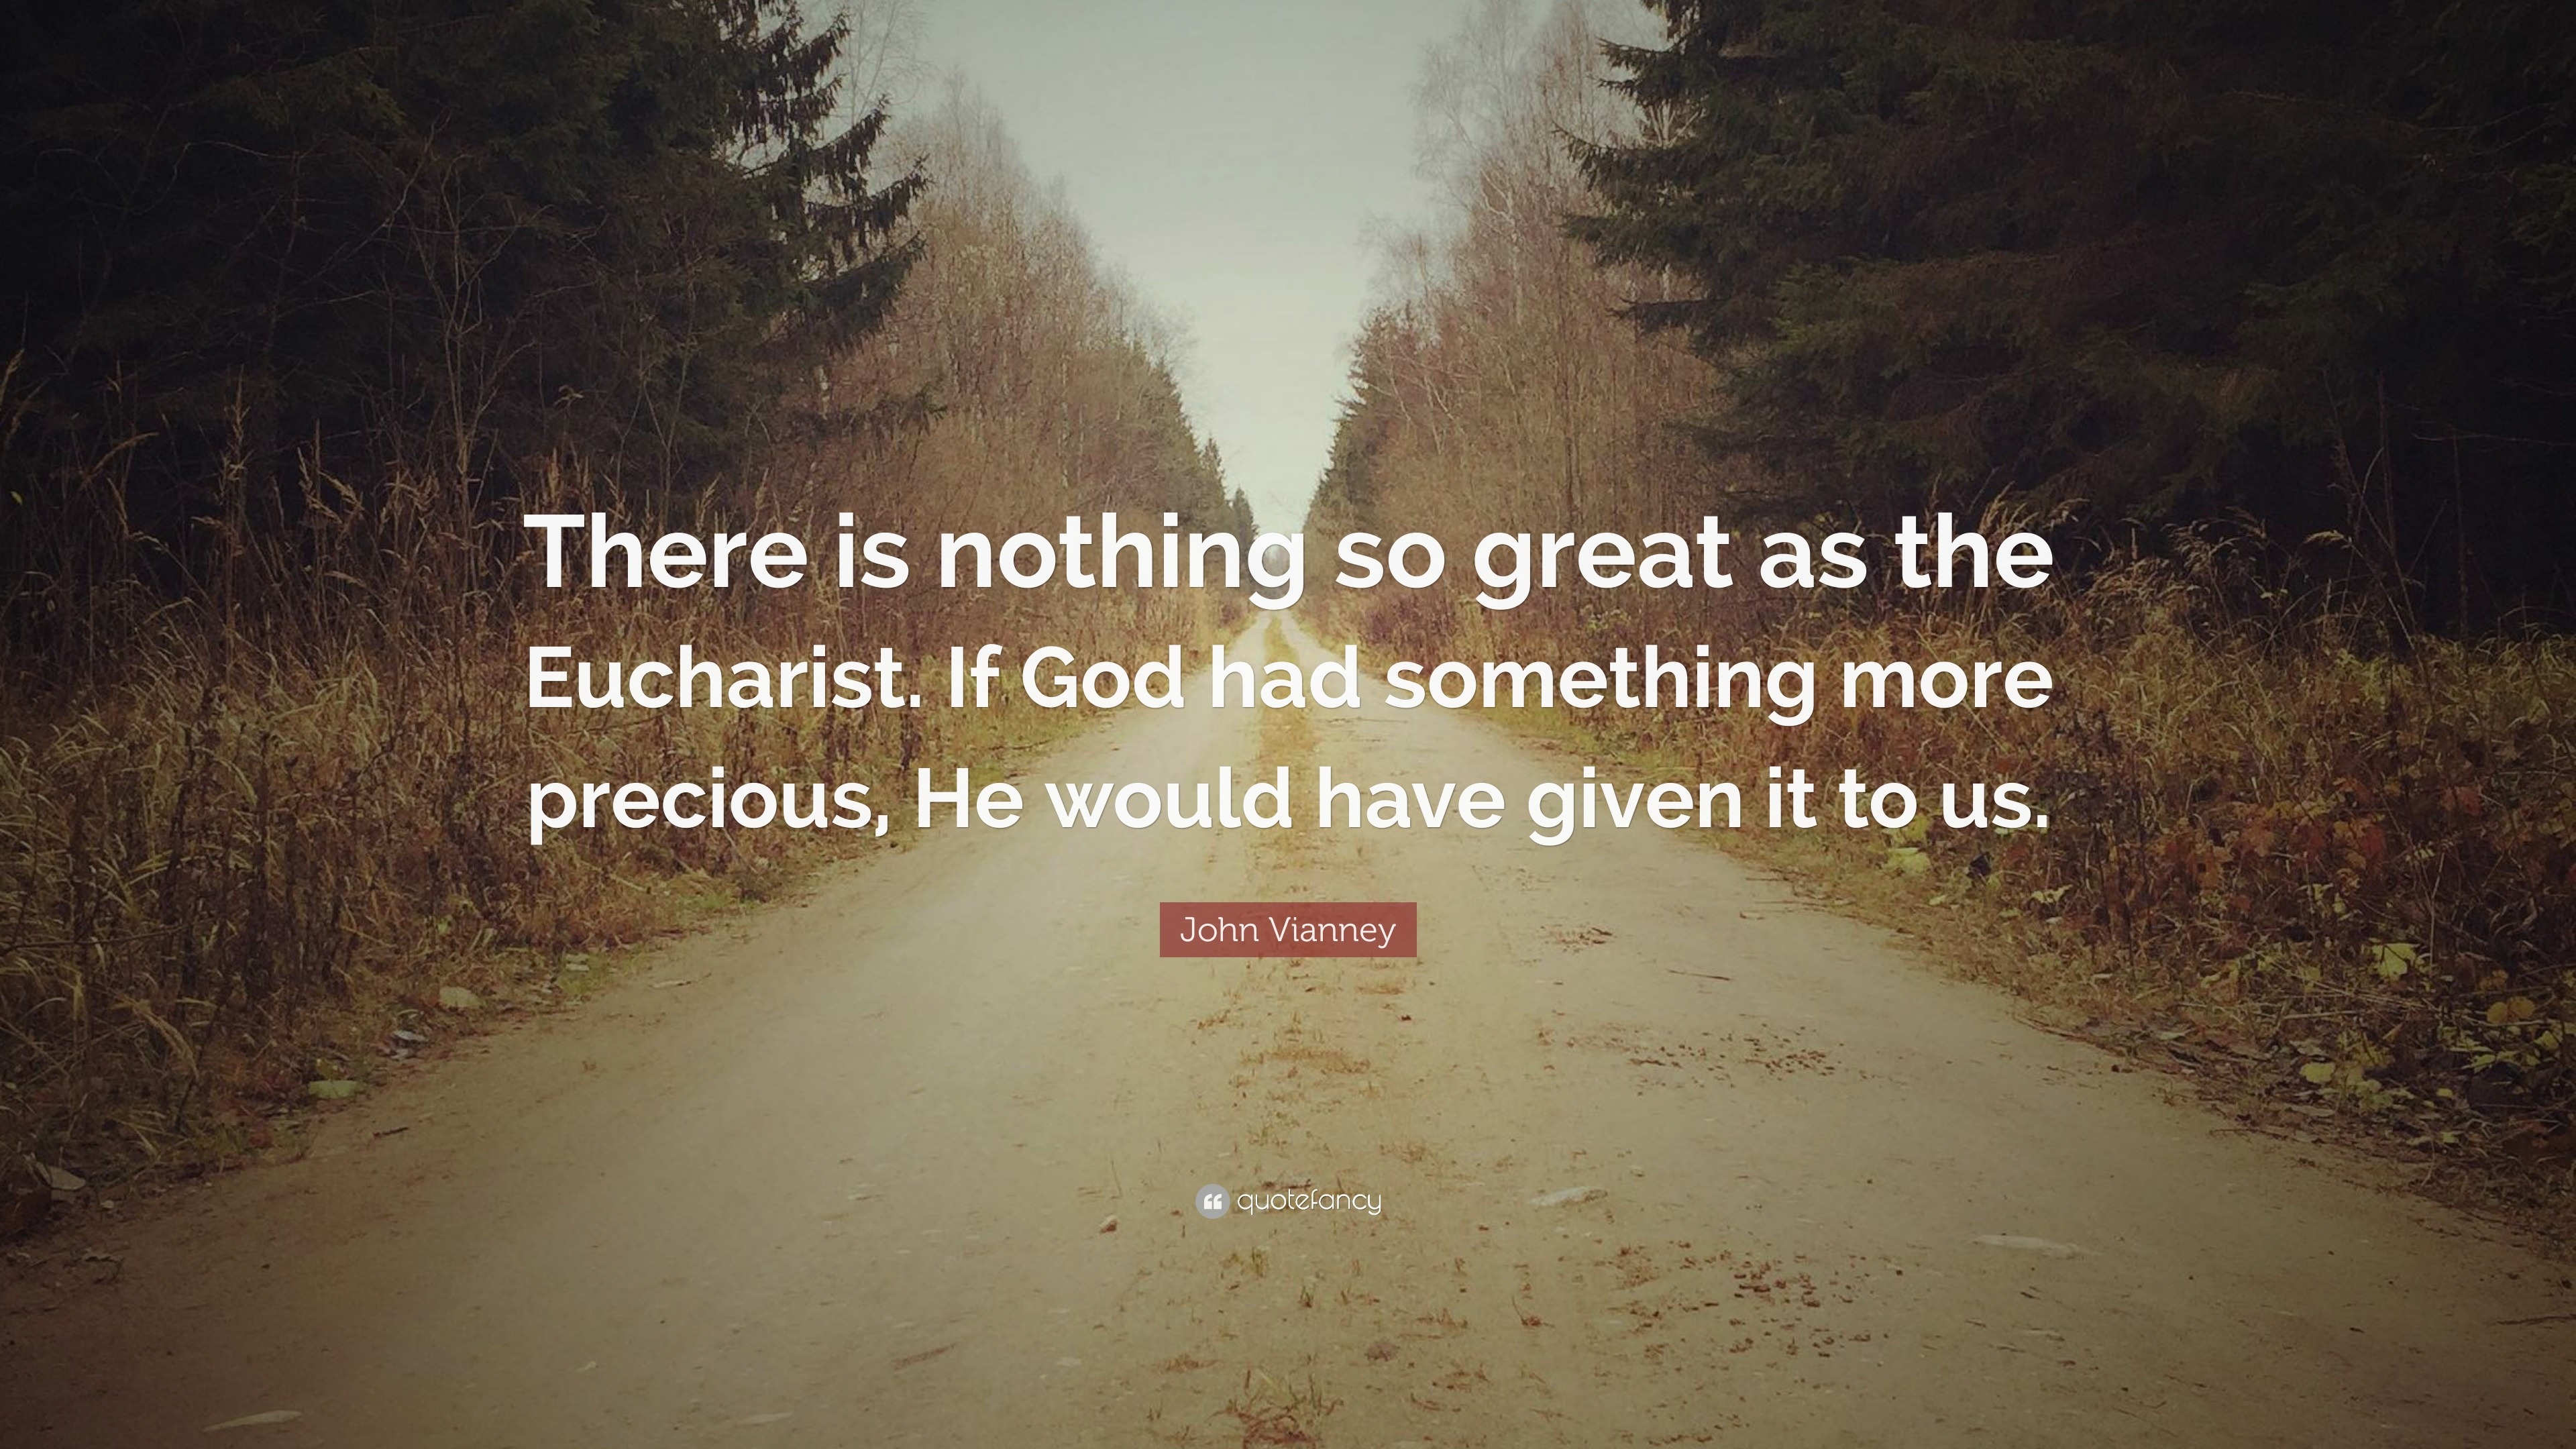 John Vianney Quote: “There is nothing so great as the Eucharist. If God ...